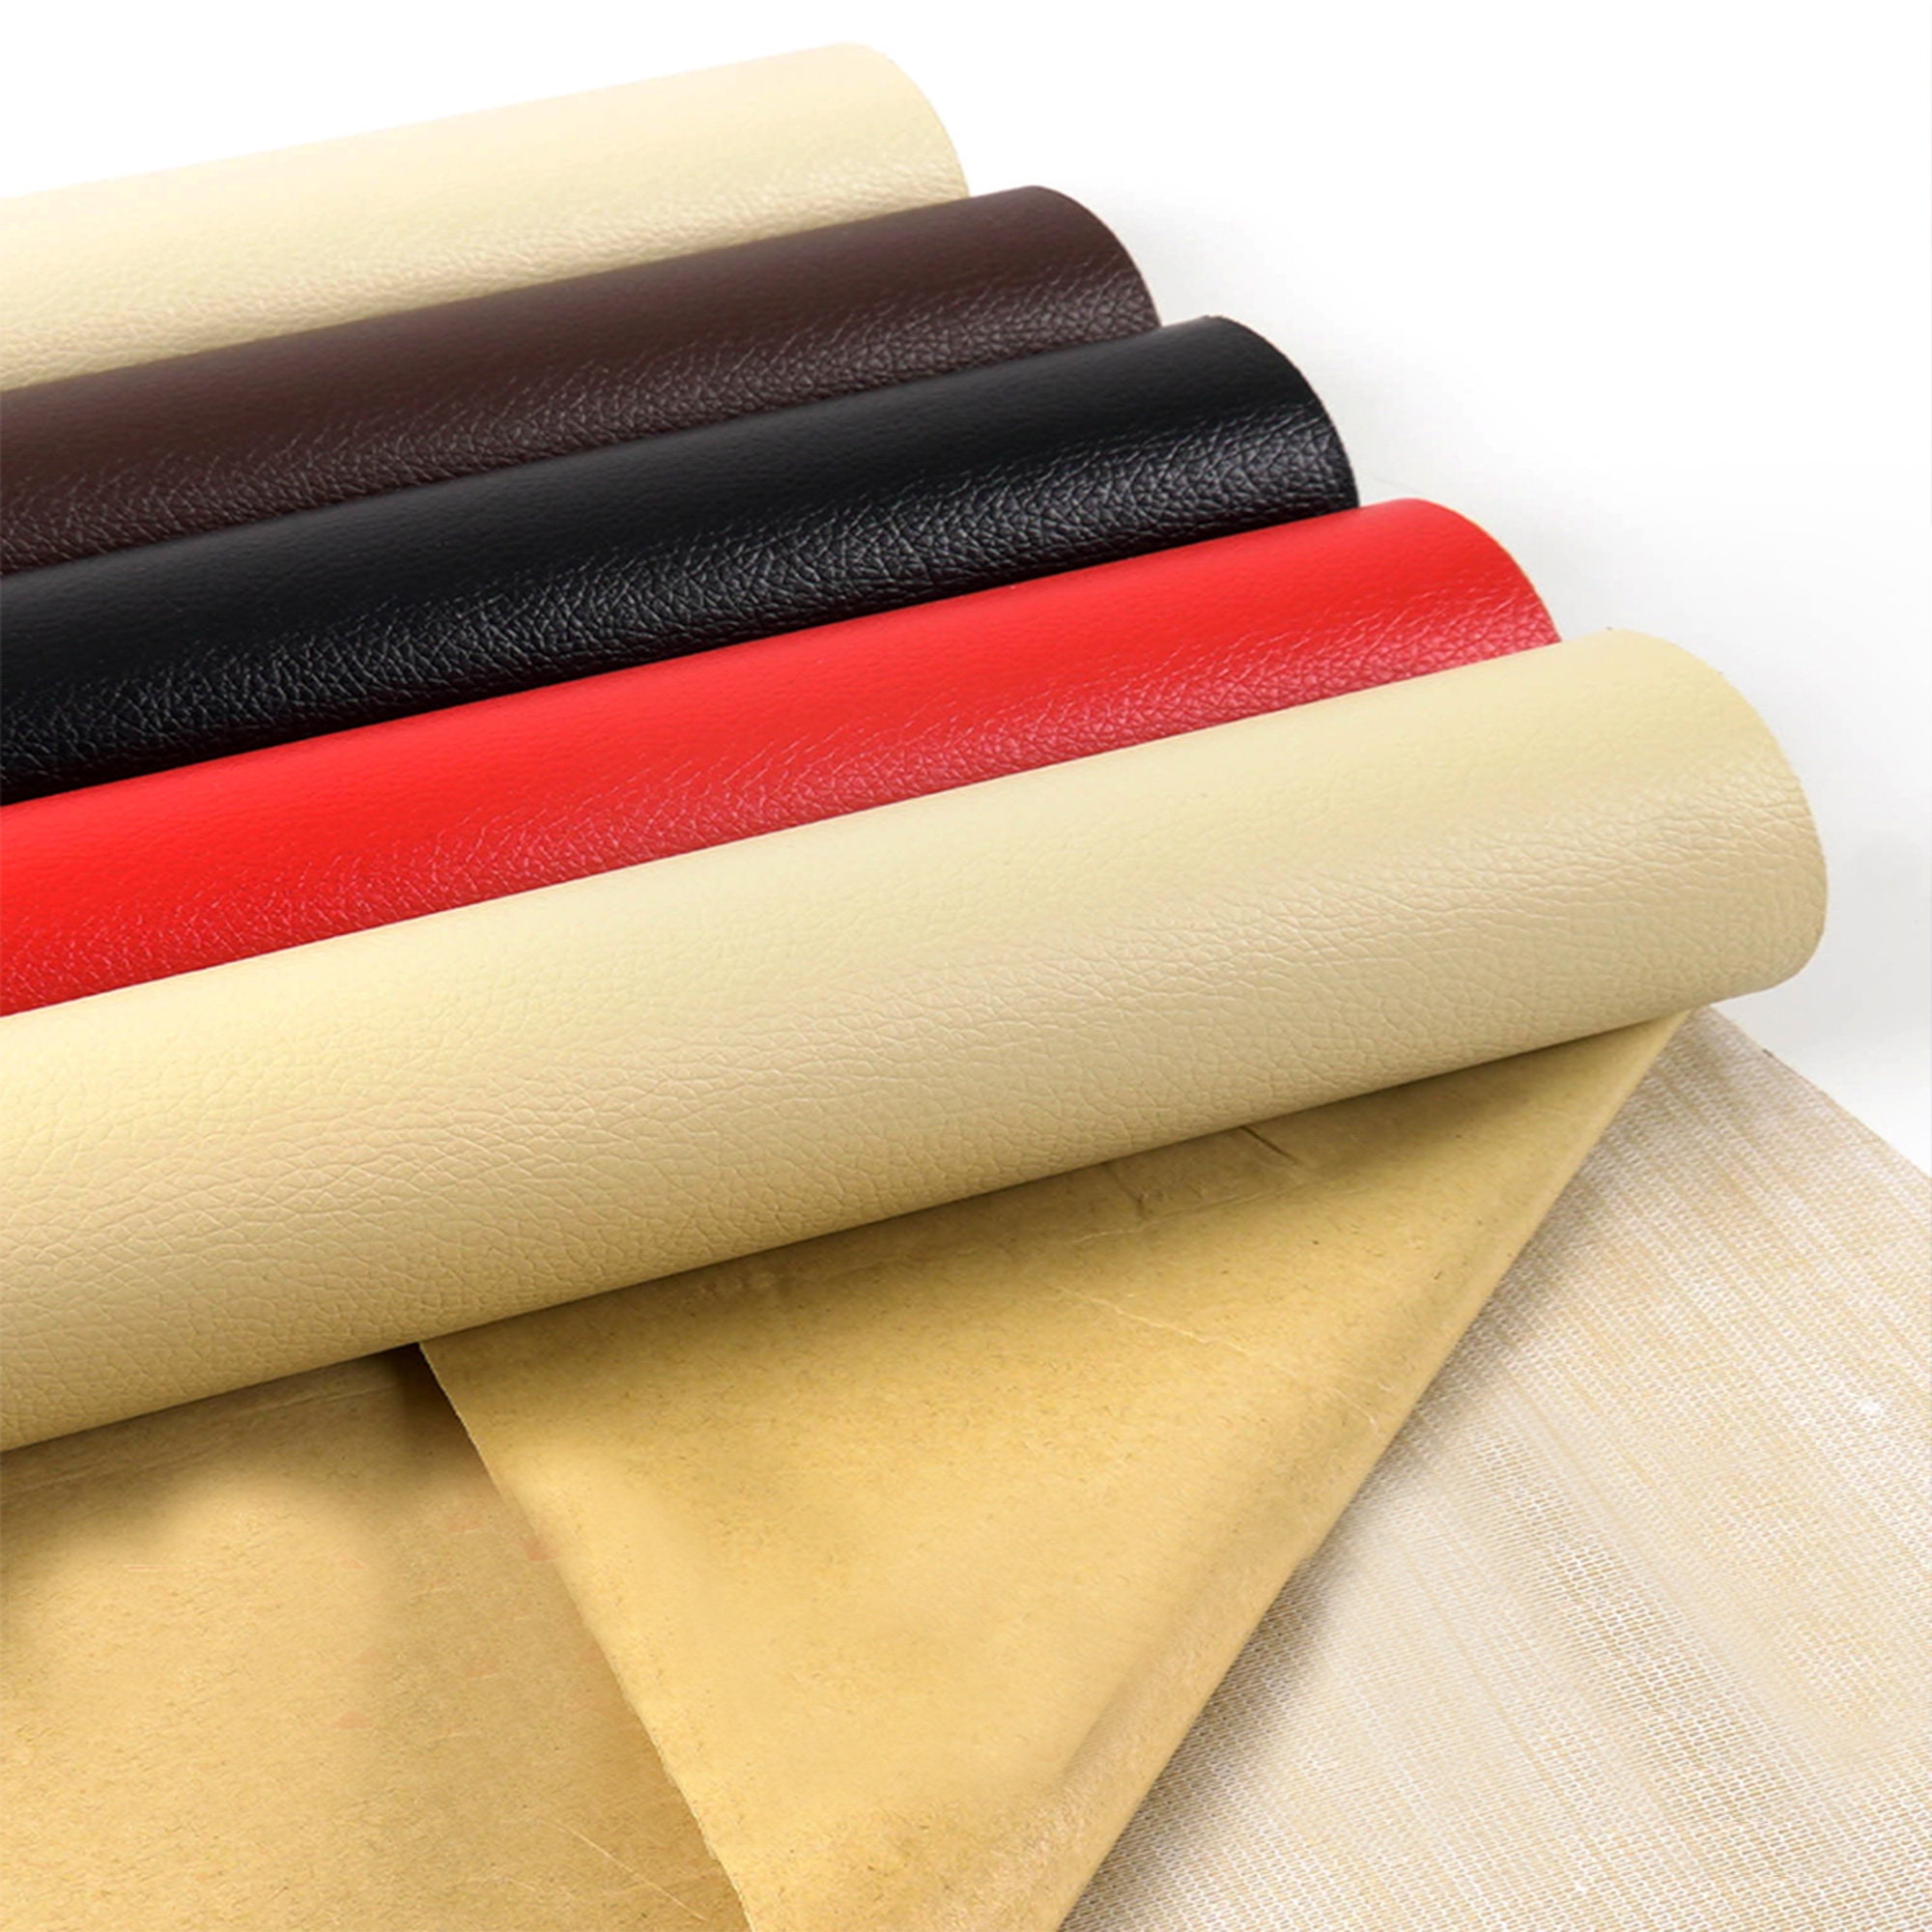 Self-adhesive Leather Fabric, Artificial Leather, Faux Leather Fabric,  Thick Fabric, Leather Sheets, DIY Cloth, Leather Repair Patch Strip 